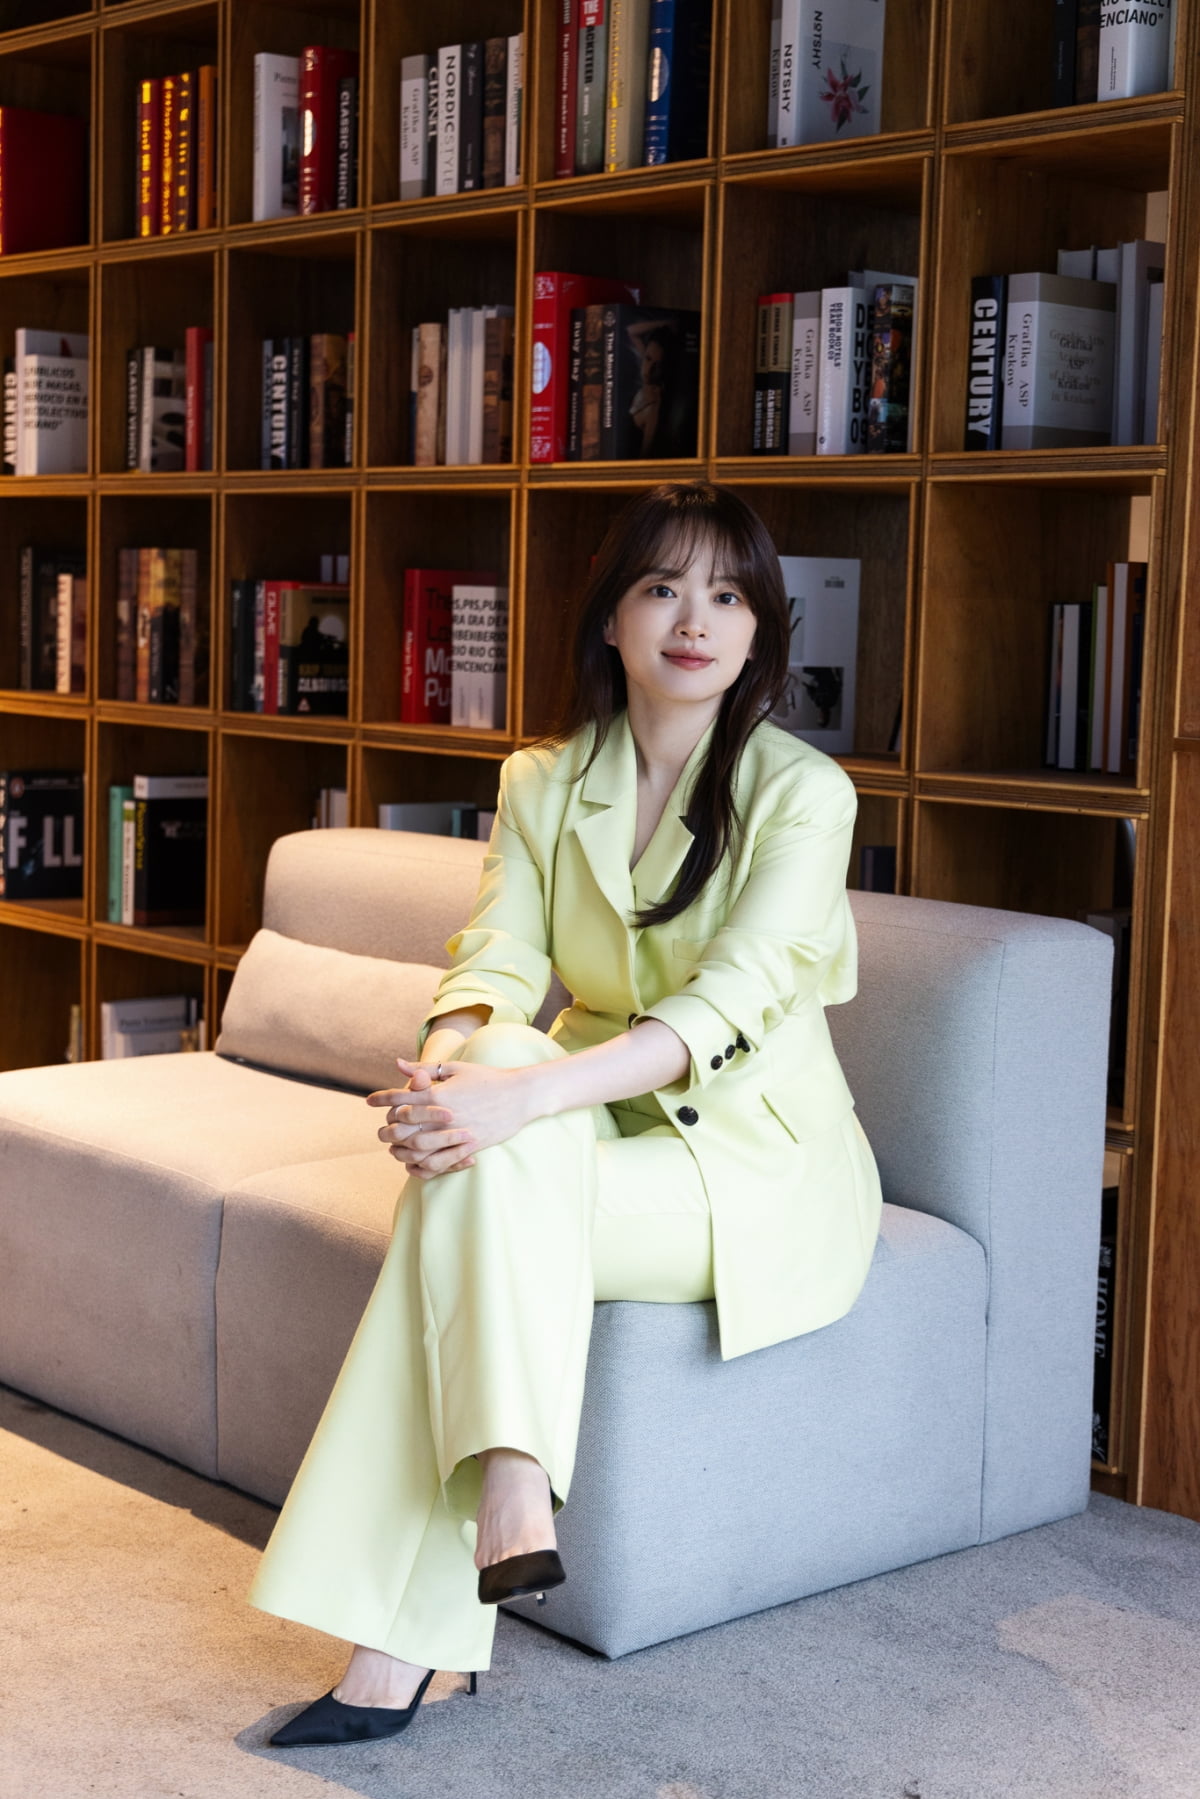 Chun Woo-hee "It's already been 20 years since my debut? Am I going to be a 'old-timer' now?"